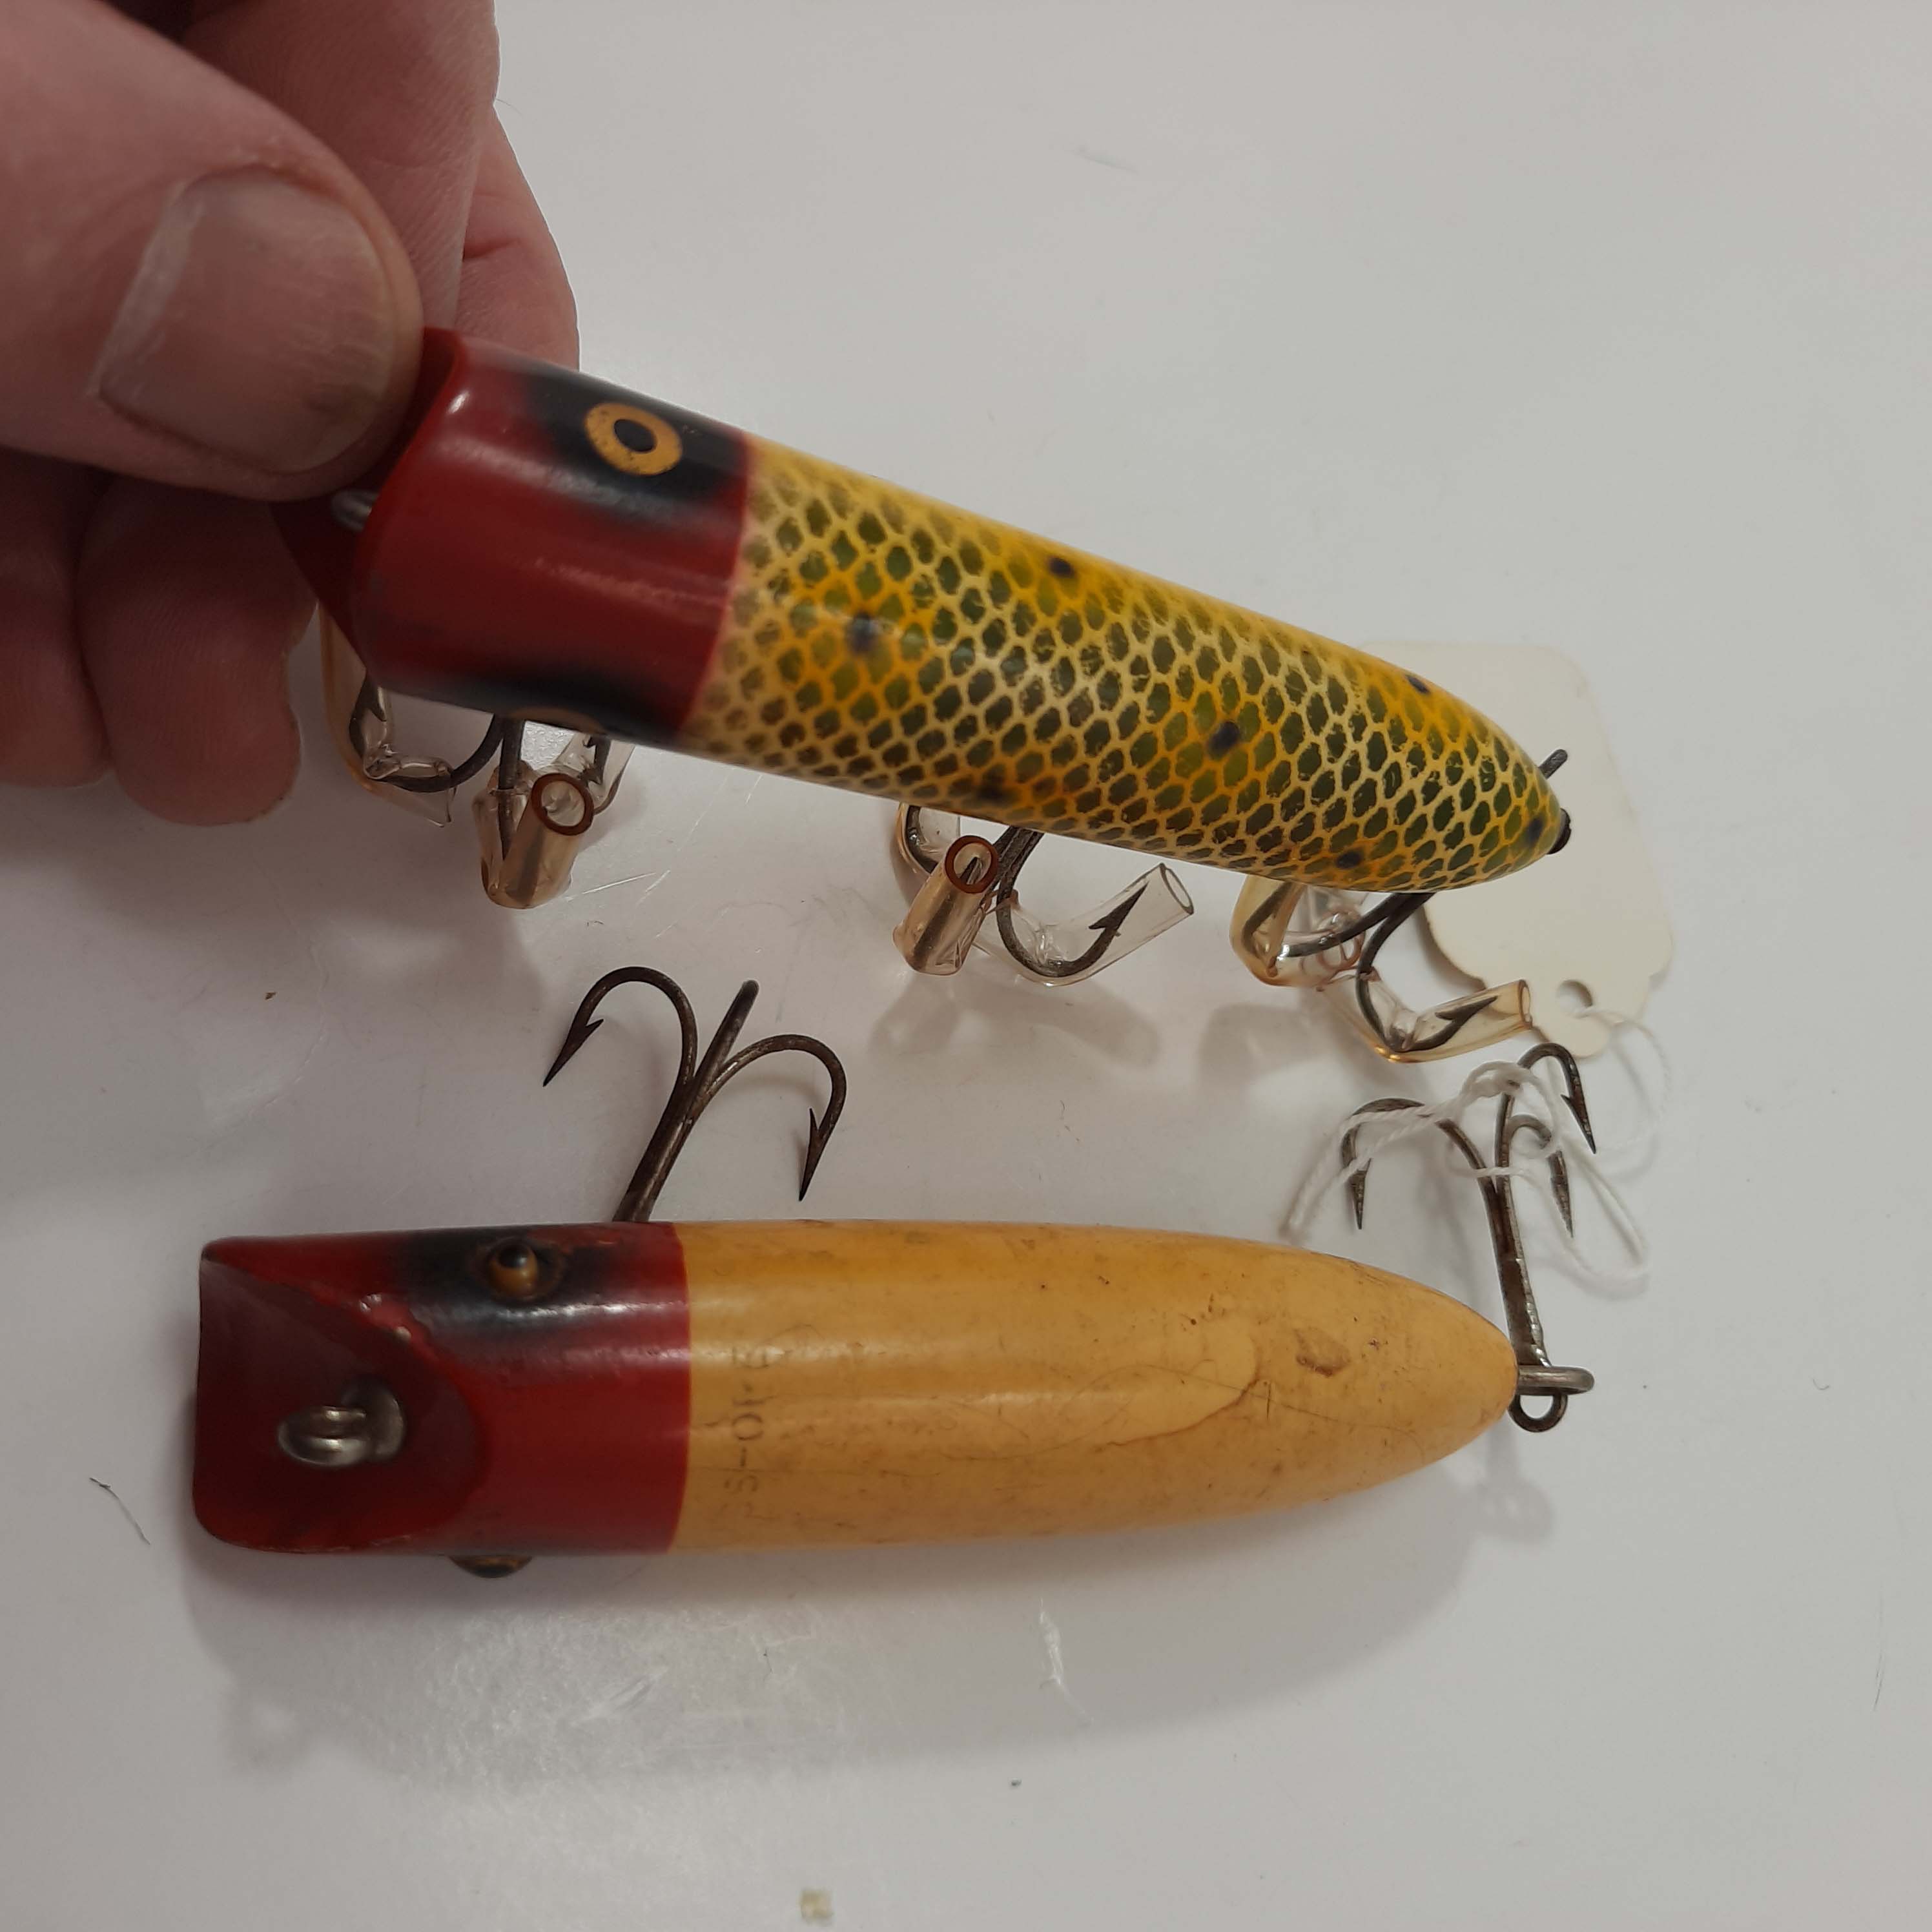 VINTAGE HEDDON LUCKY 13 Old Wood Bass Fishing Lure Glass Eyes